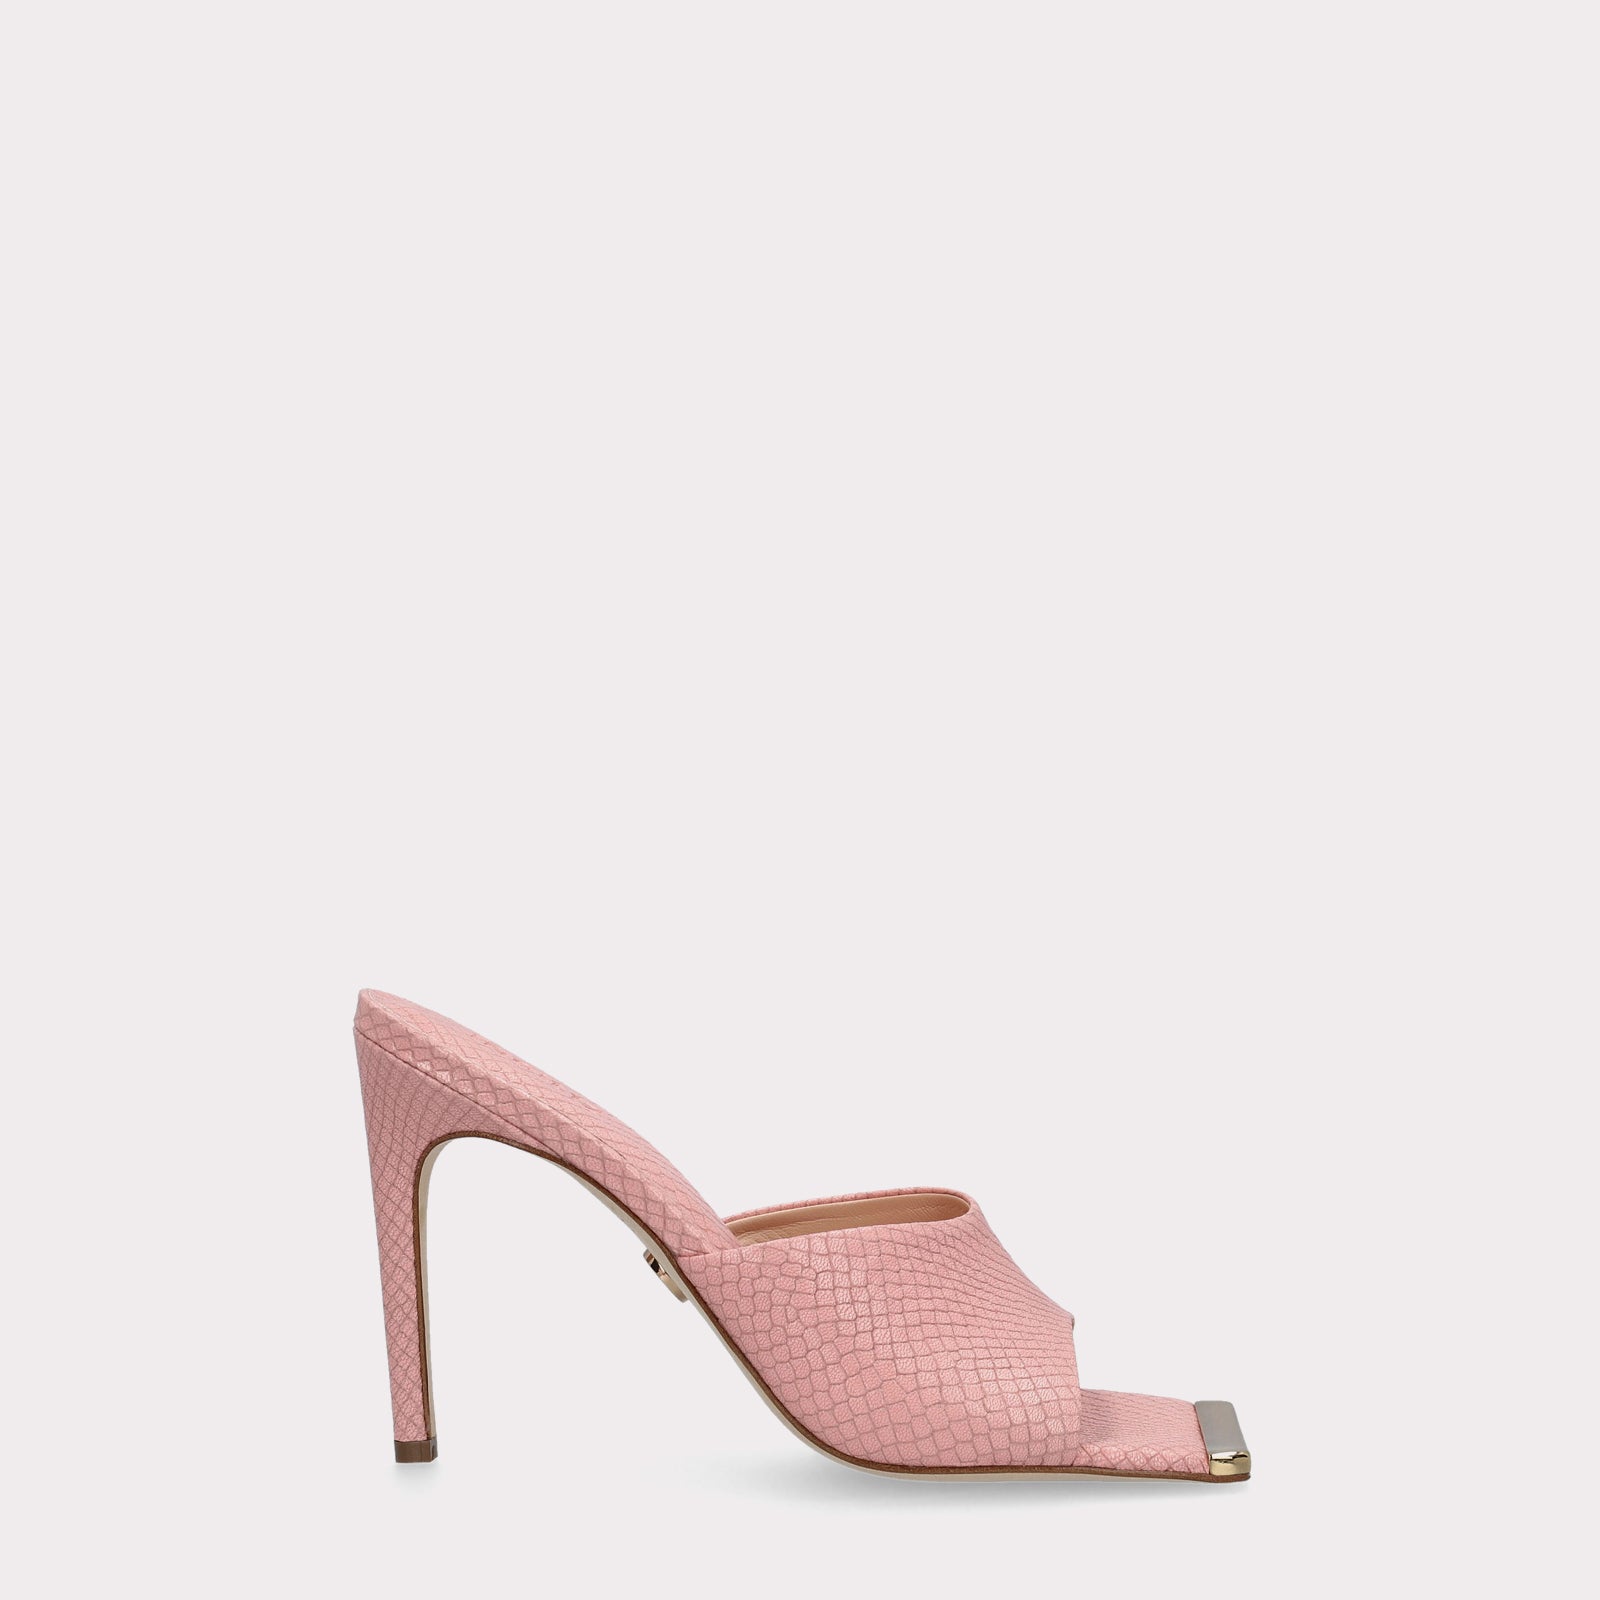 TEXTURED LEATHER MULES KALINA PINK